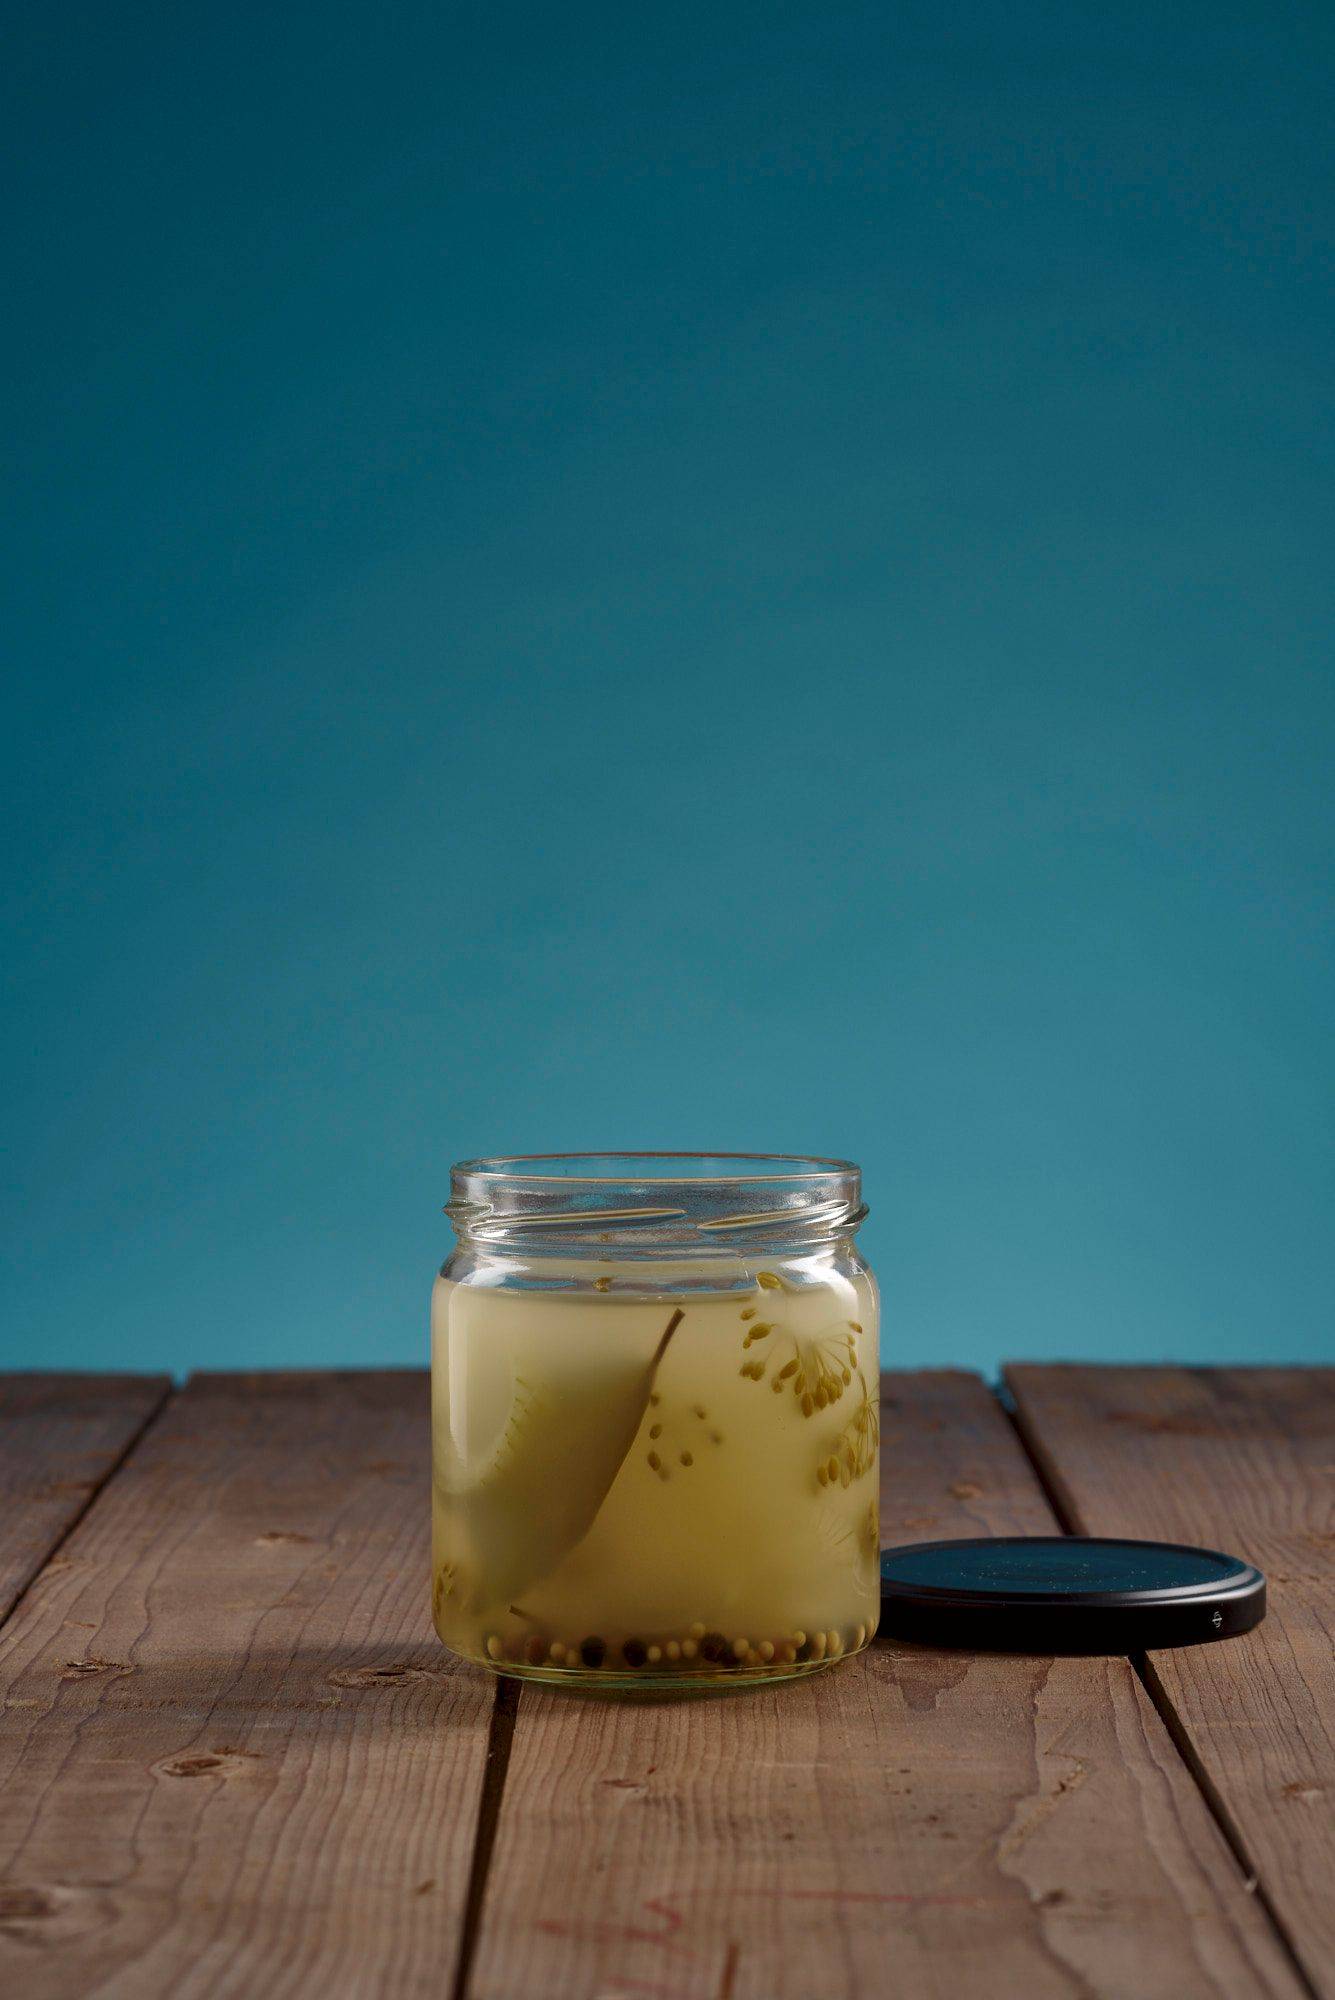 a glass of gherkin pickles stock with wooden table and blue background